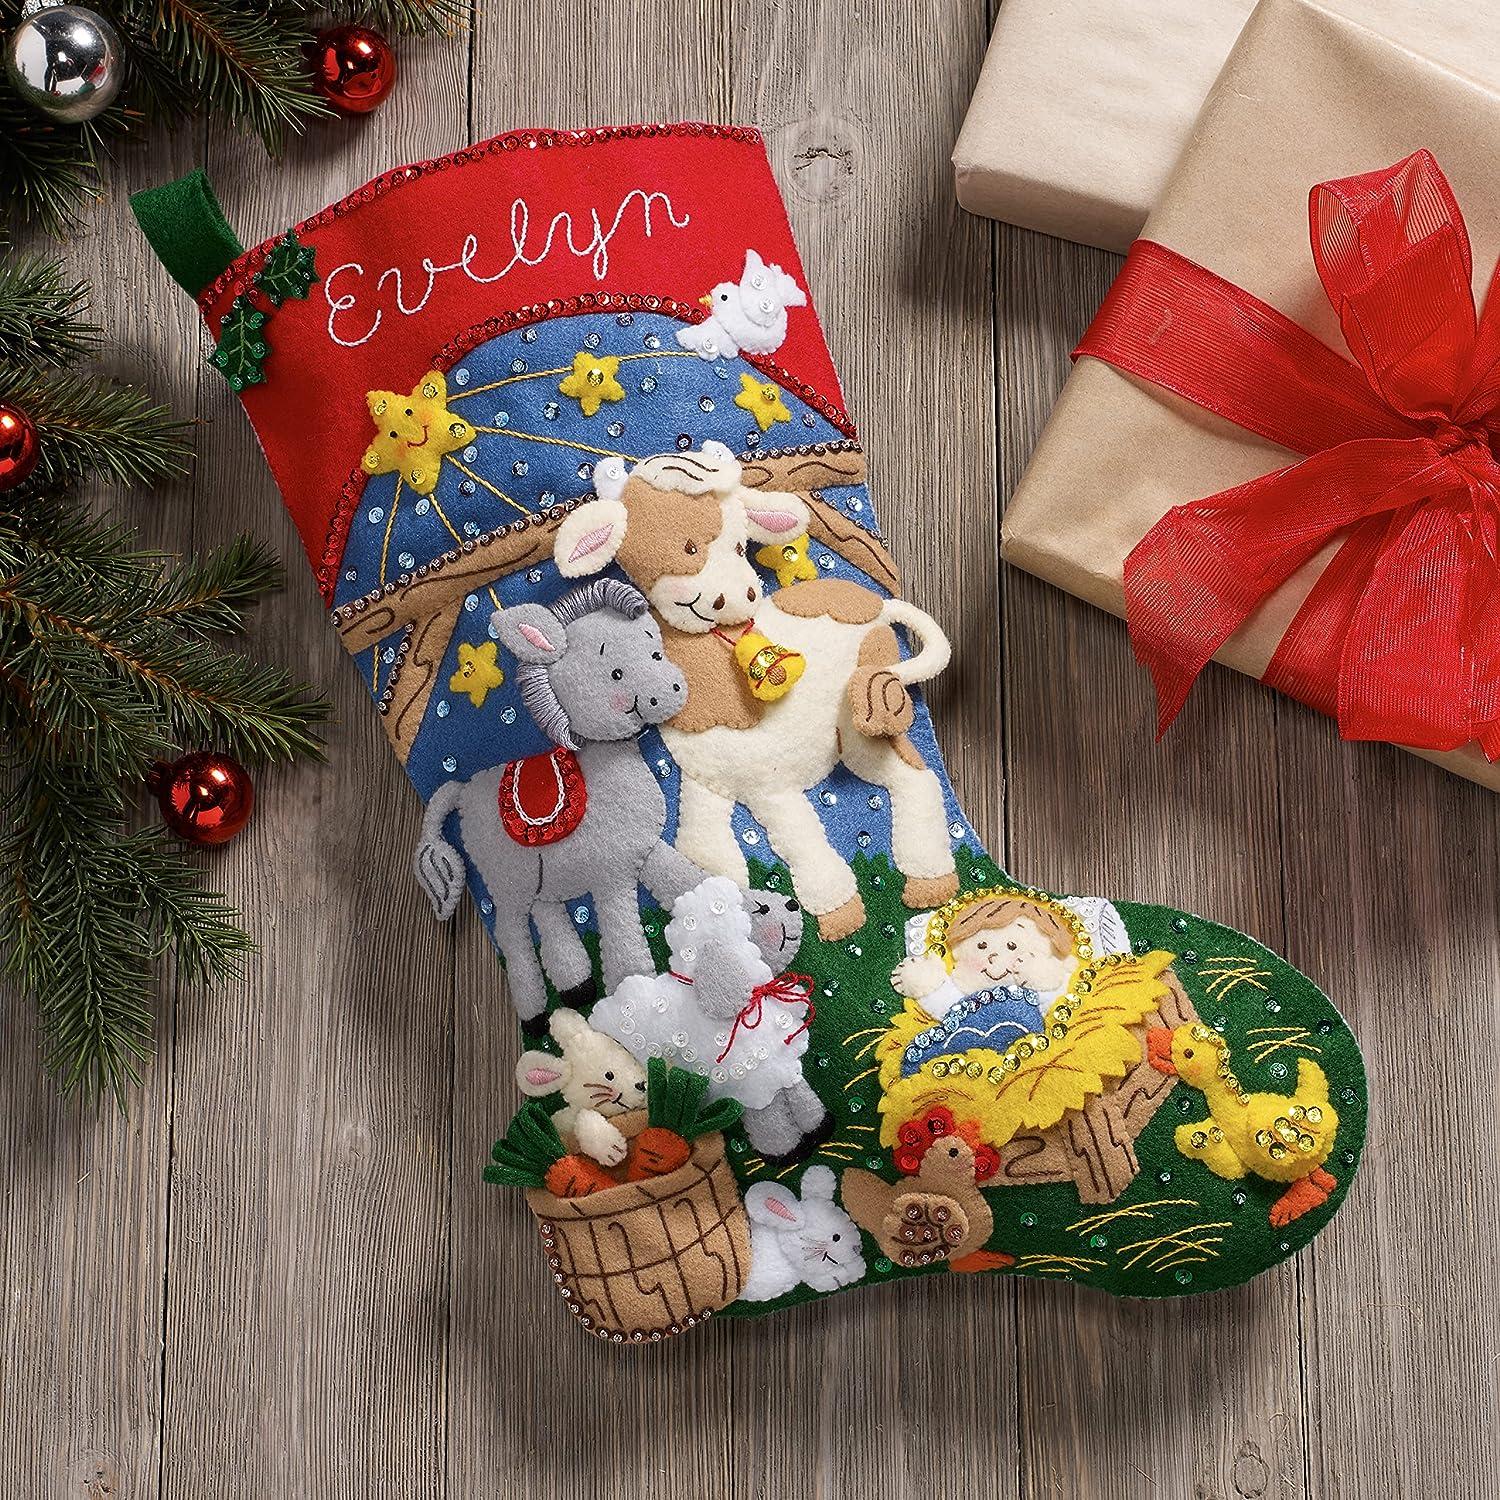 Needlepoint Personalized Christmas Stocking: Tree and Gifts